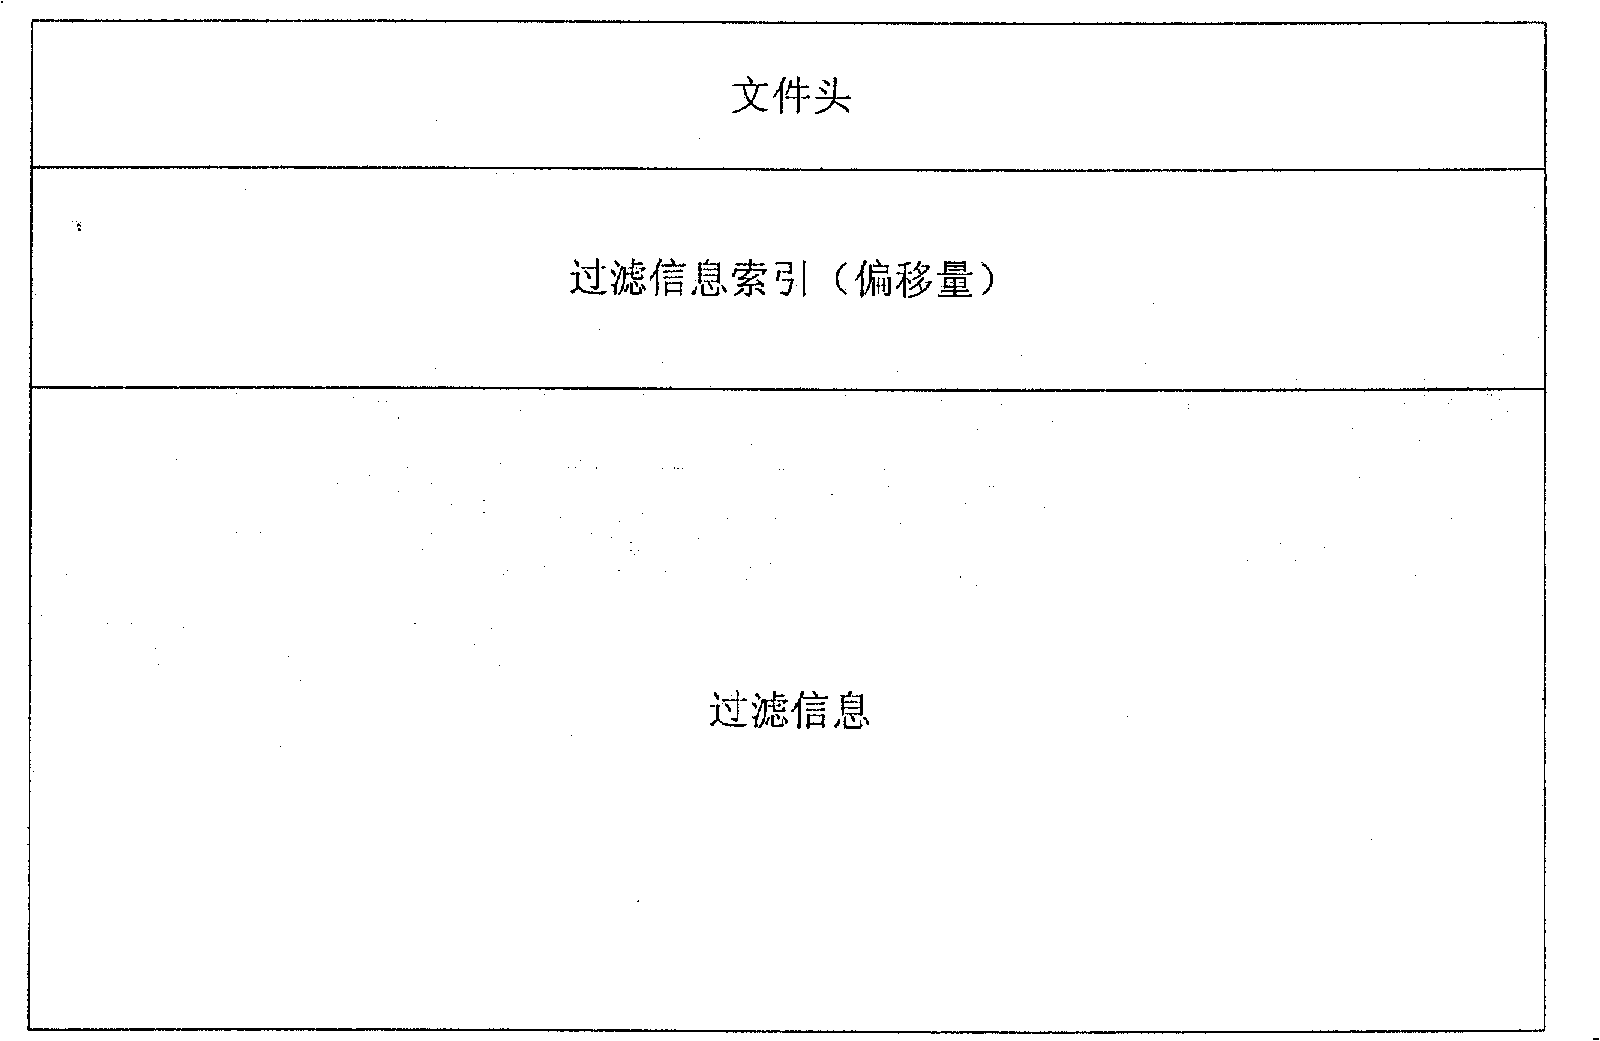 Internal memory and file system mixing rearrangement method based on HASH algorithm